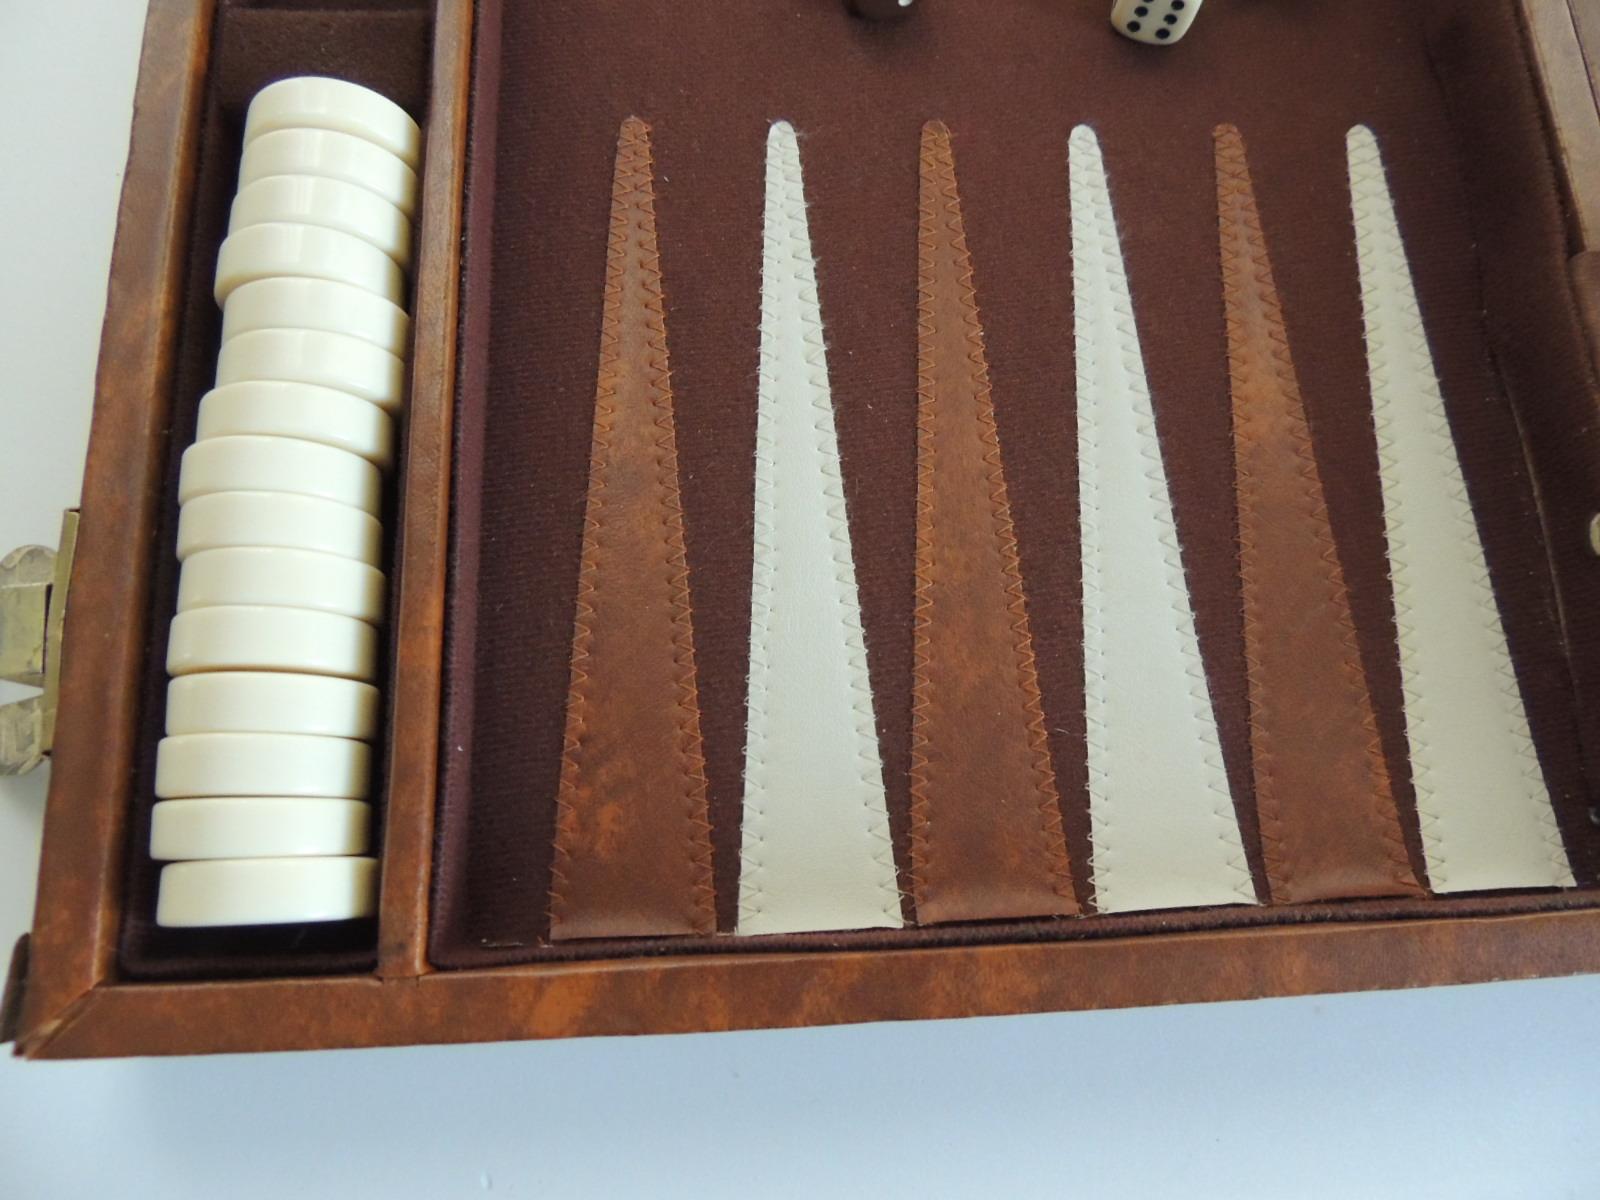 Vintage brown and tan backgammon game.
Size: 15.5